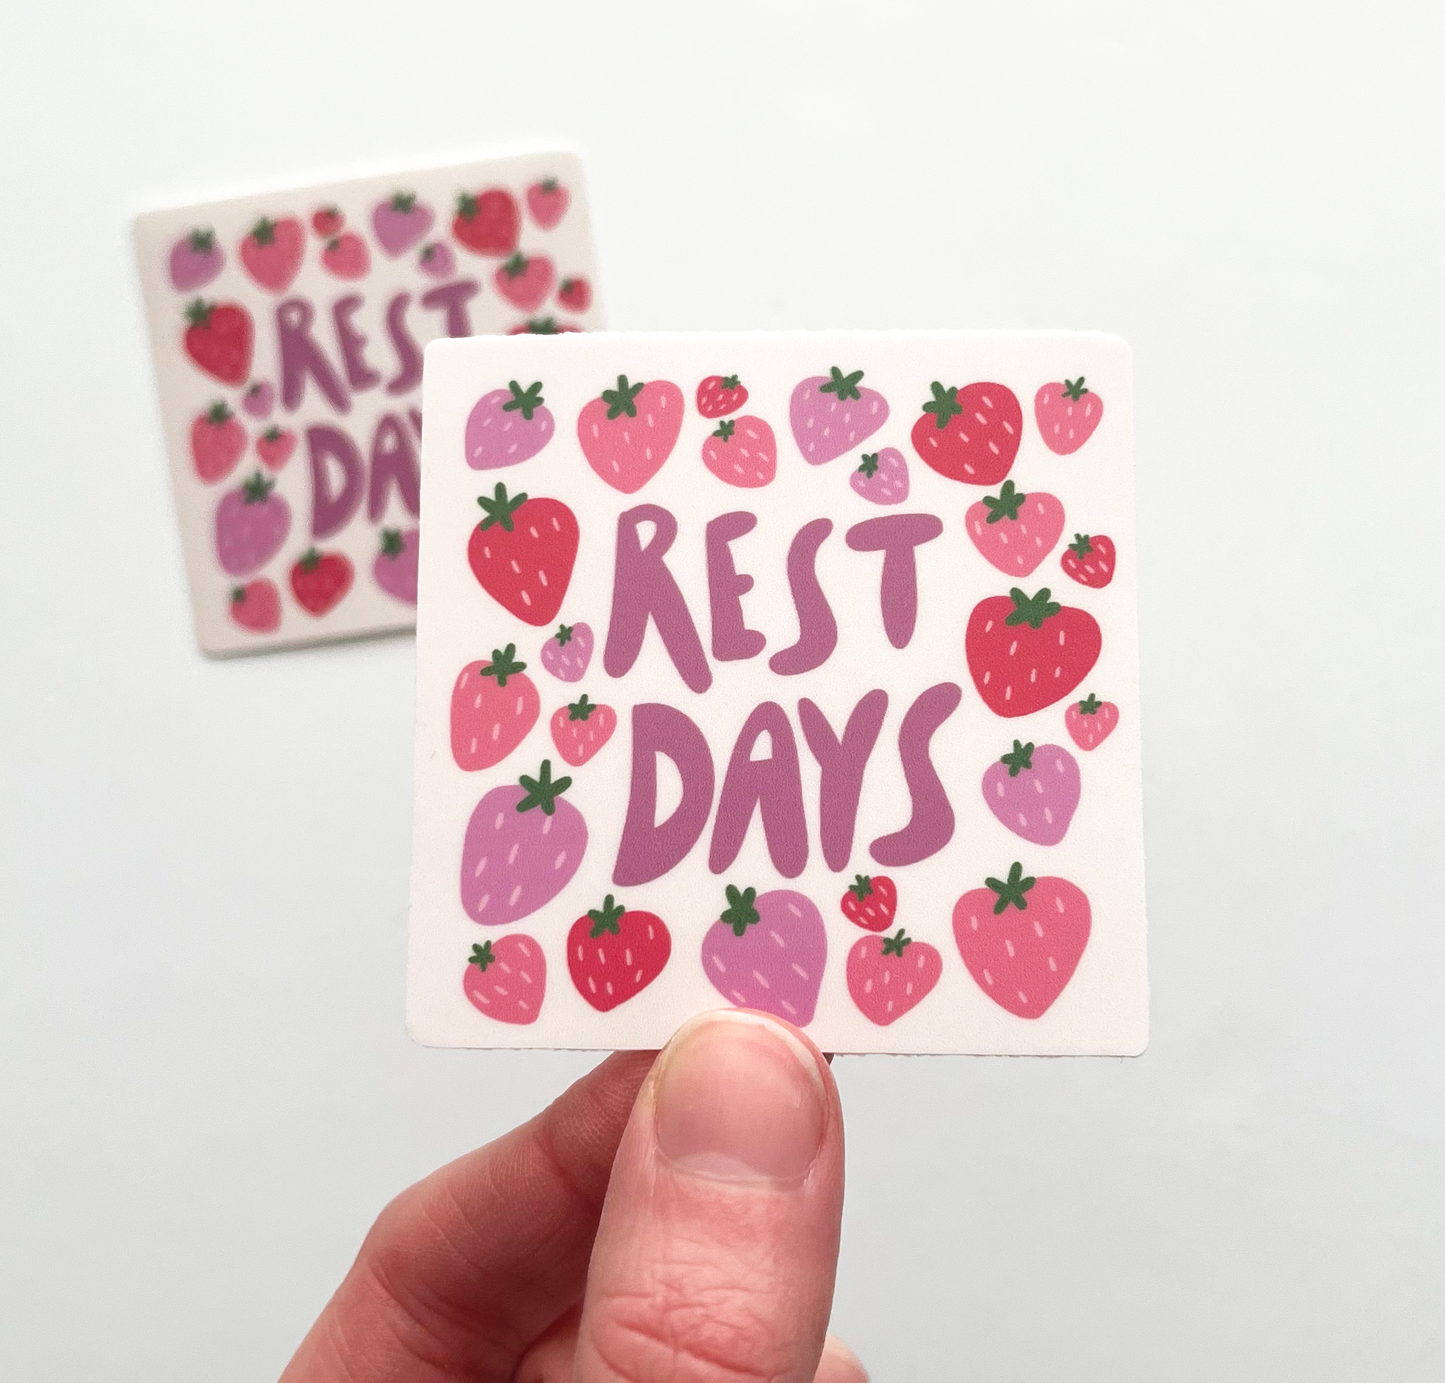 Hand holding rest days sticker. Rest Days is written in the middle of sticker in purple bubble letters. The text is surrounded by pink and purple strawberries filling the entire square.